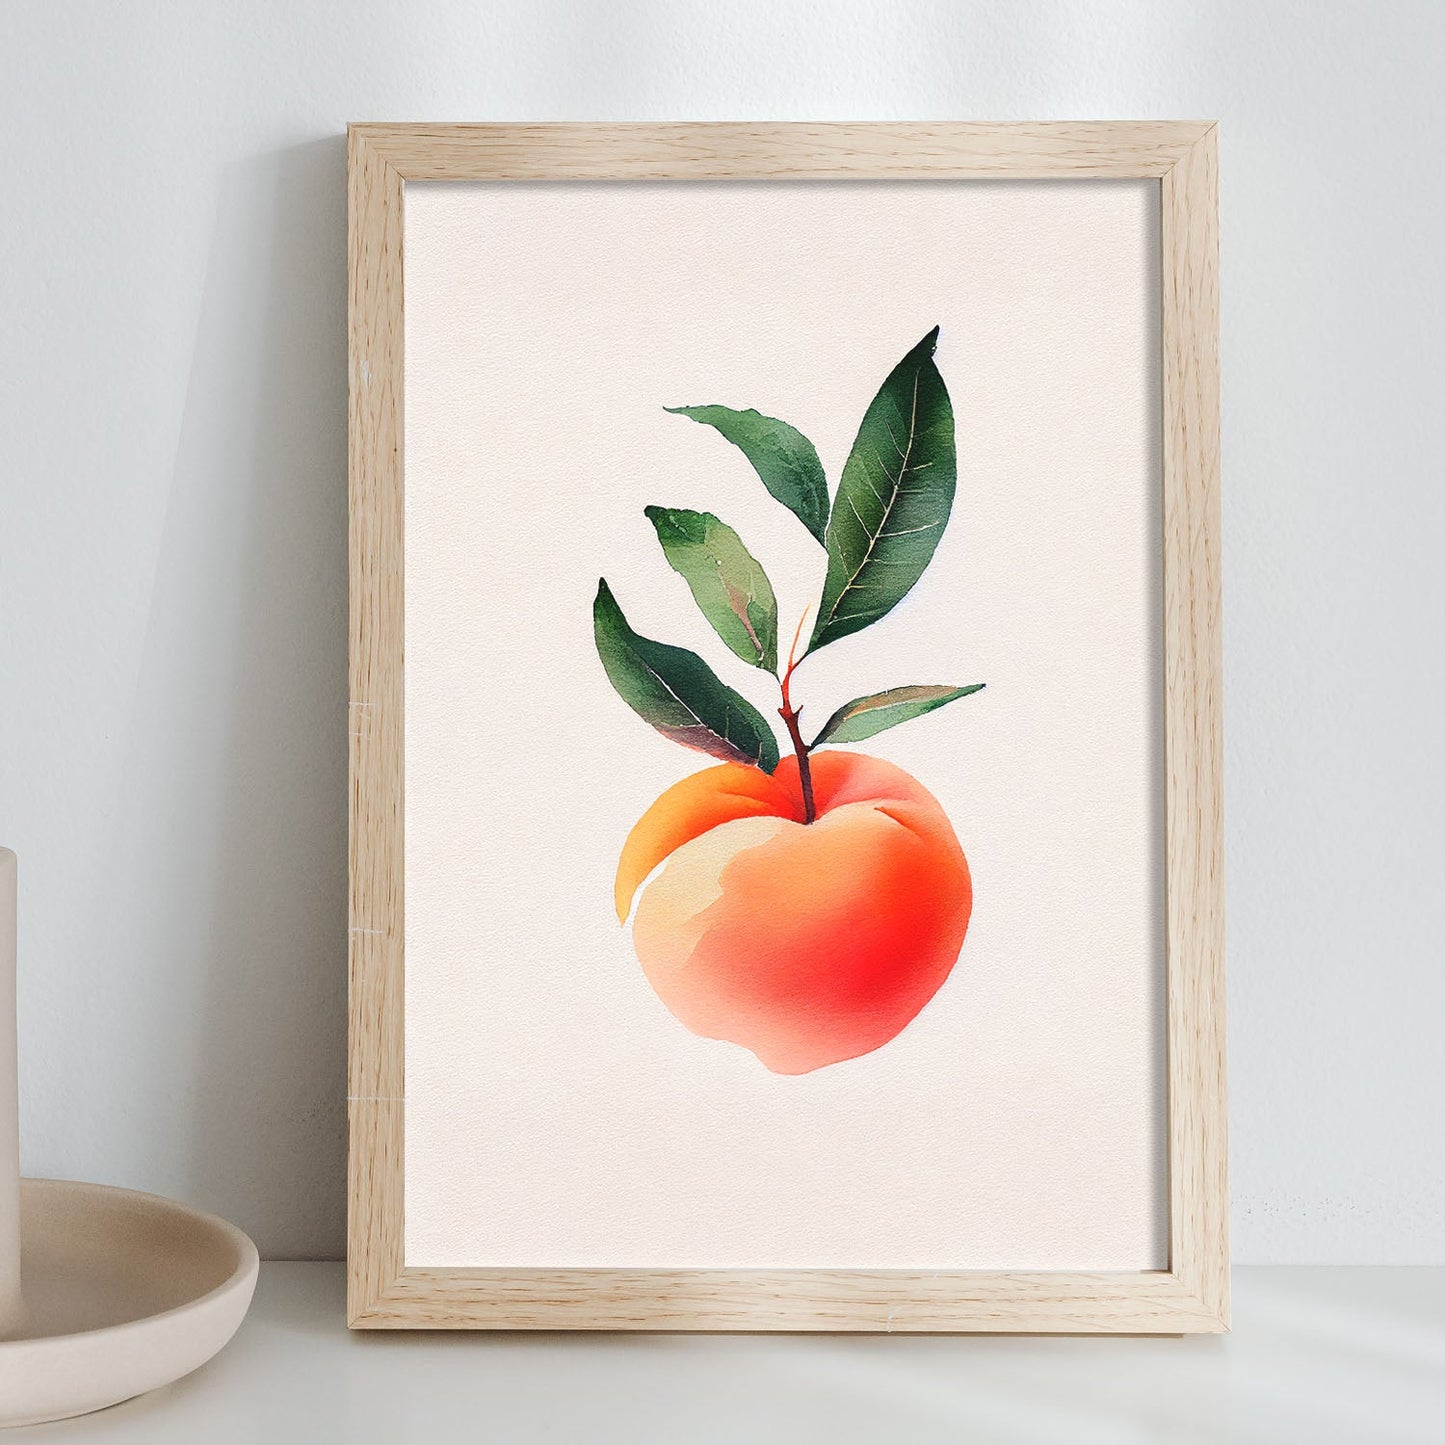 Nacnic minimalist Peach_1. Aesthetic Wall Art Prints for Bedroom or Living Room Design.